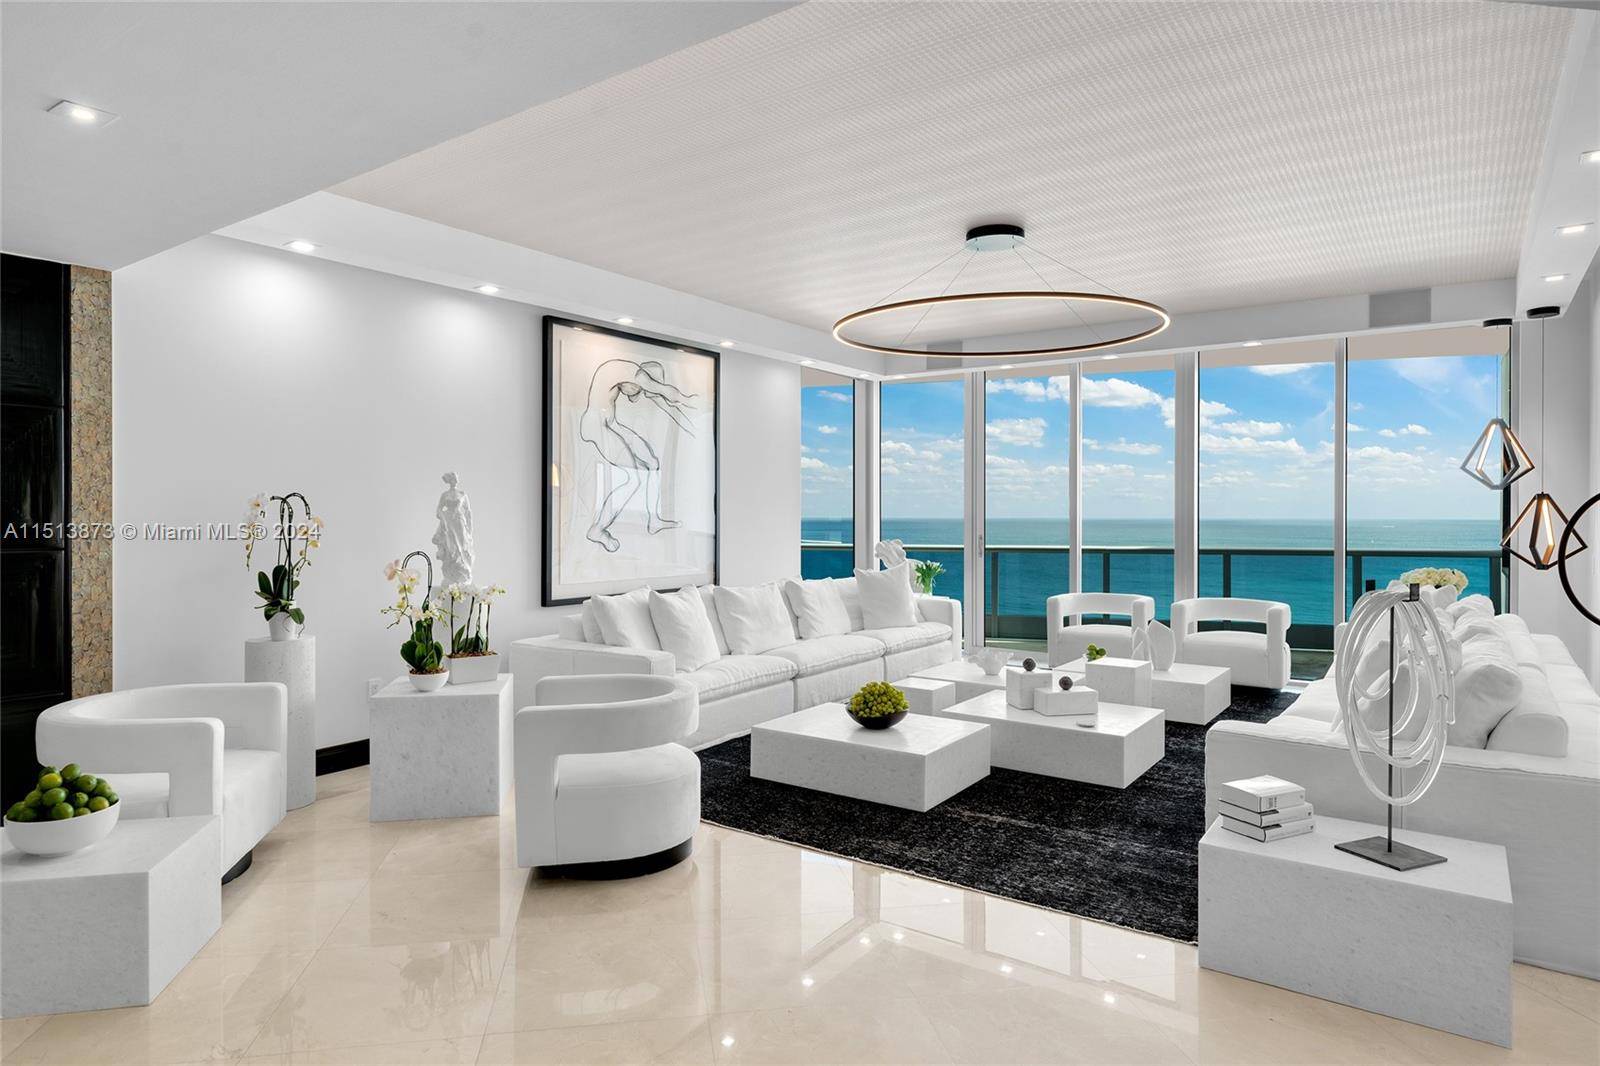 Located at the exclusive Bath Club, this immaculately designed oceanfront unit exemplifies luxury living w meticulous attention to every design detail.